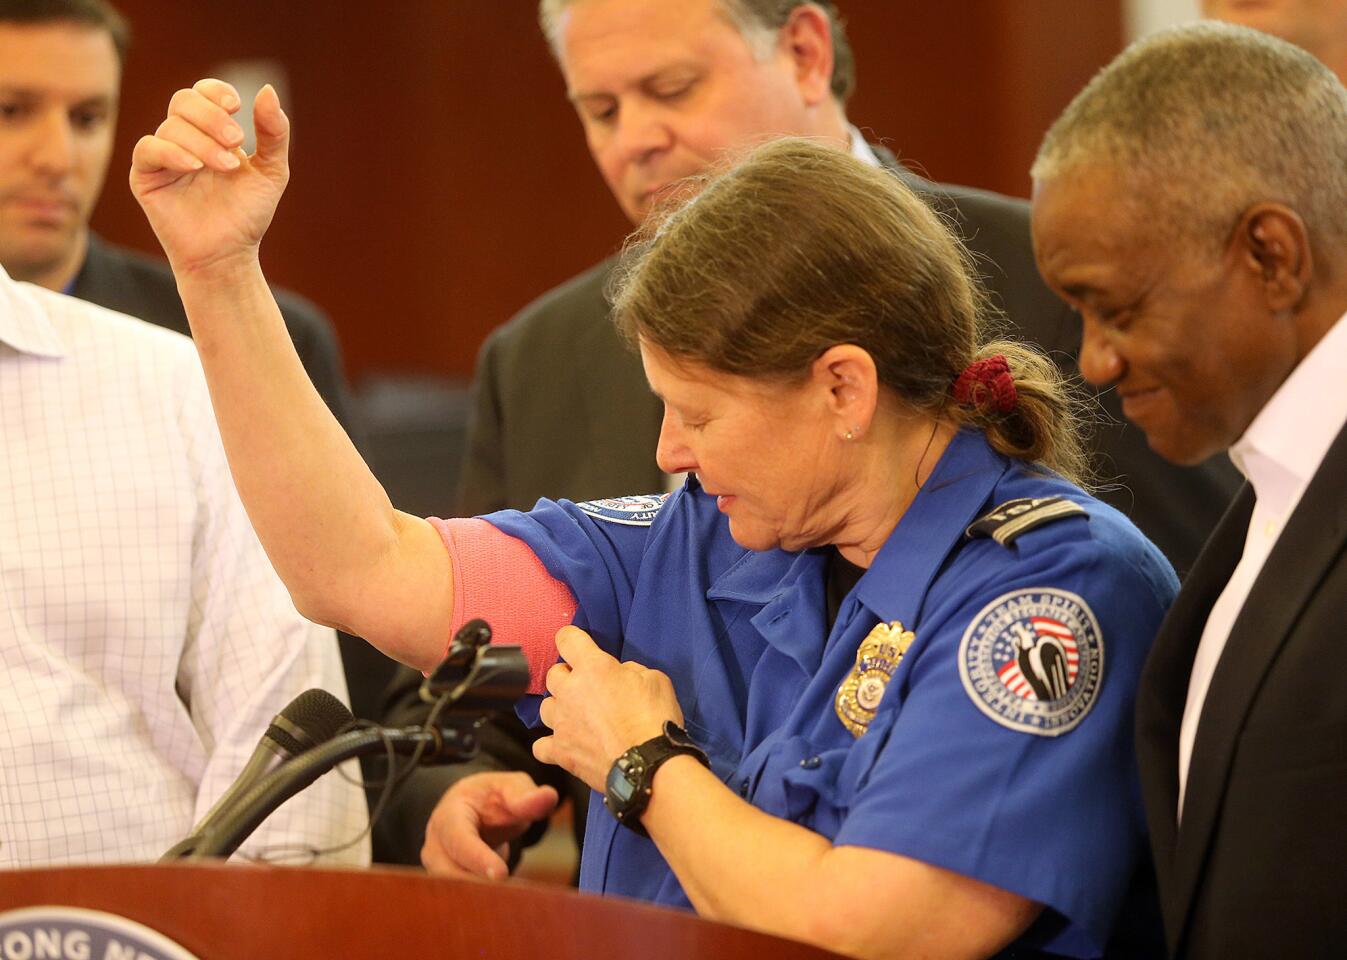 During a press conference March 21, TSA agent Carol Richel shows the gunshot wound to the arm she suffered as she was chased by a machete-wielding man at a security checkpoint in Kenner, La.